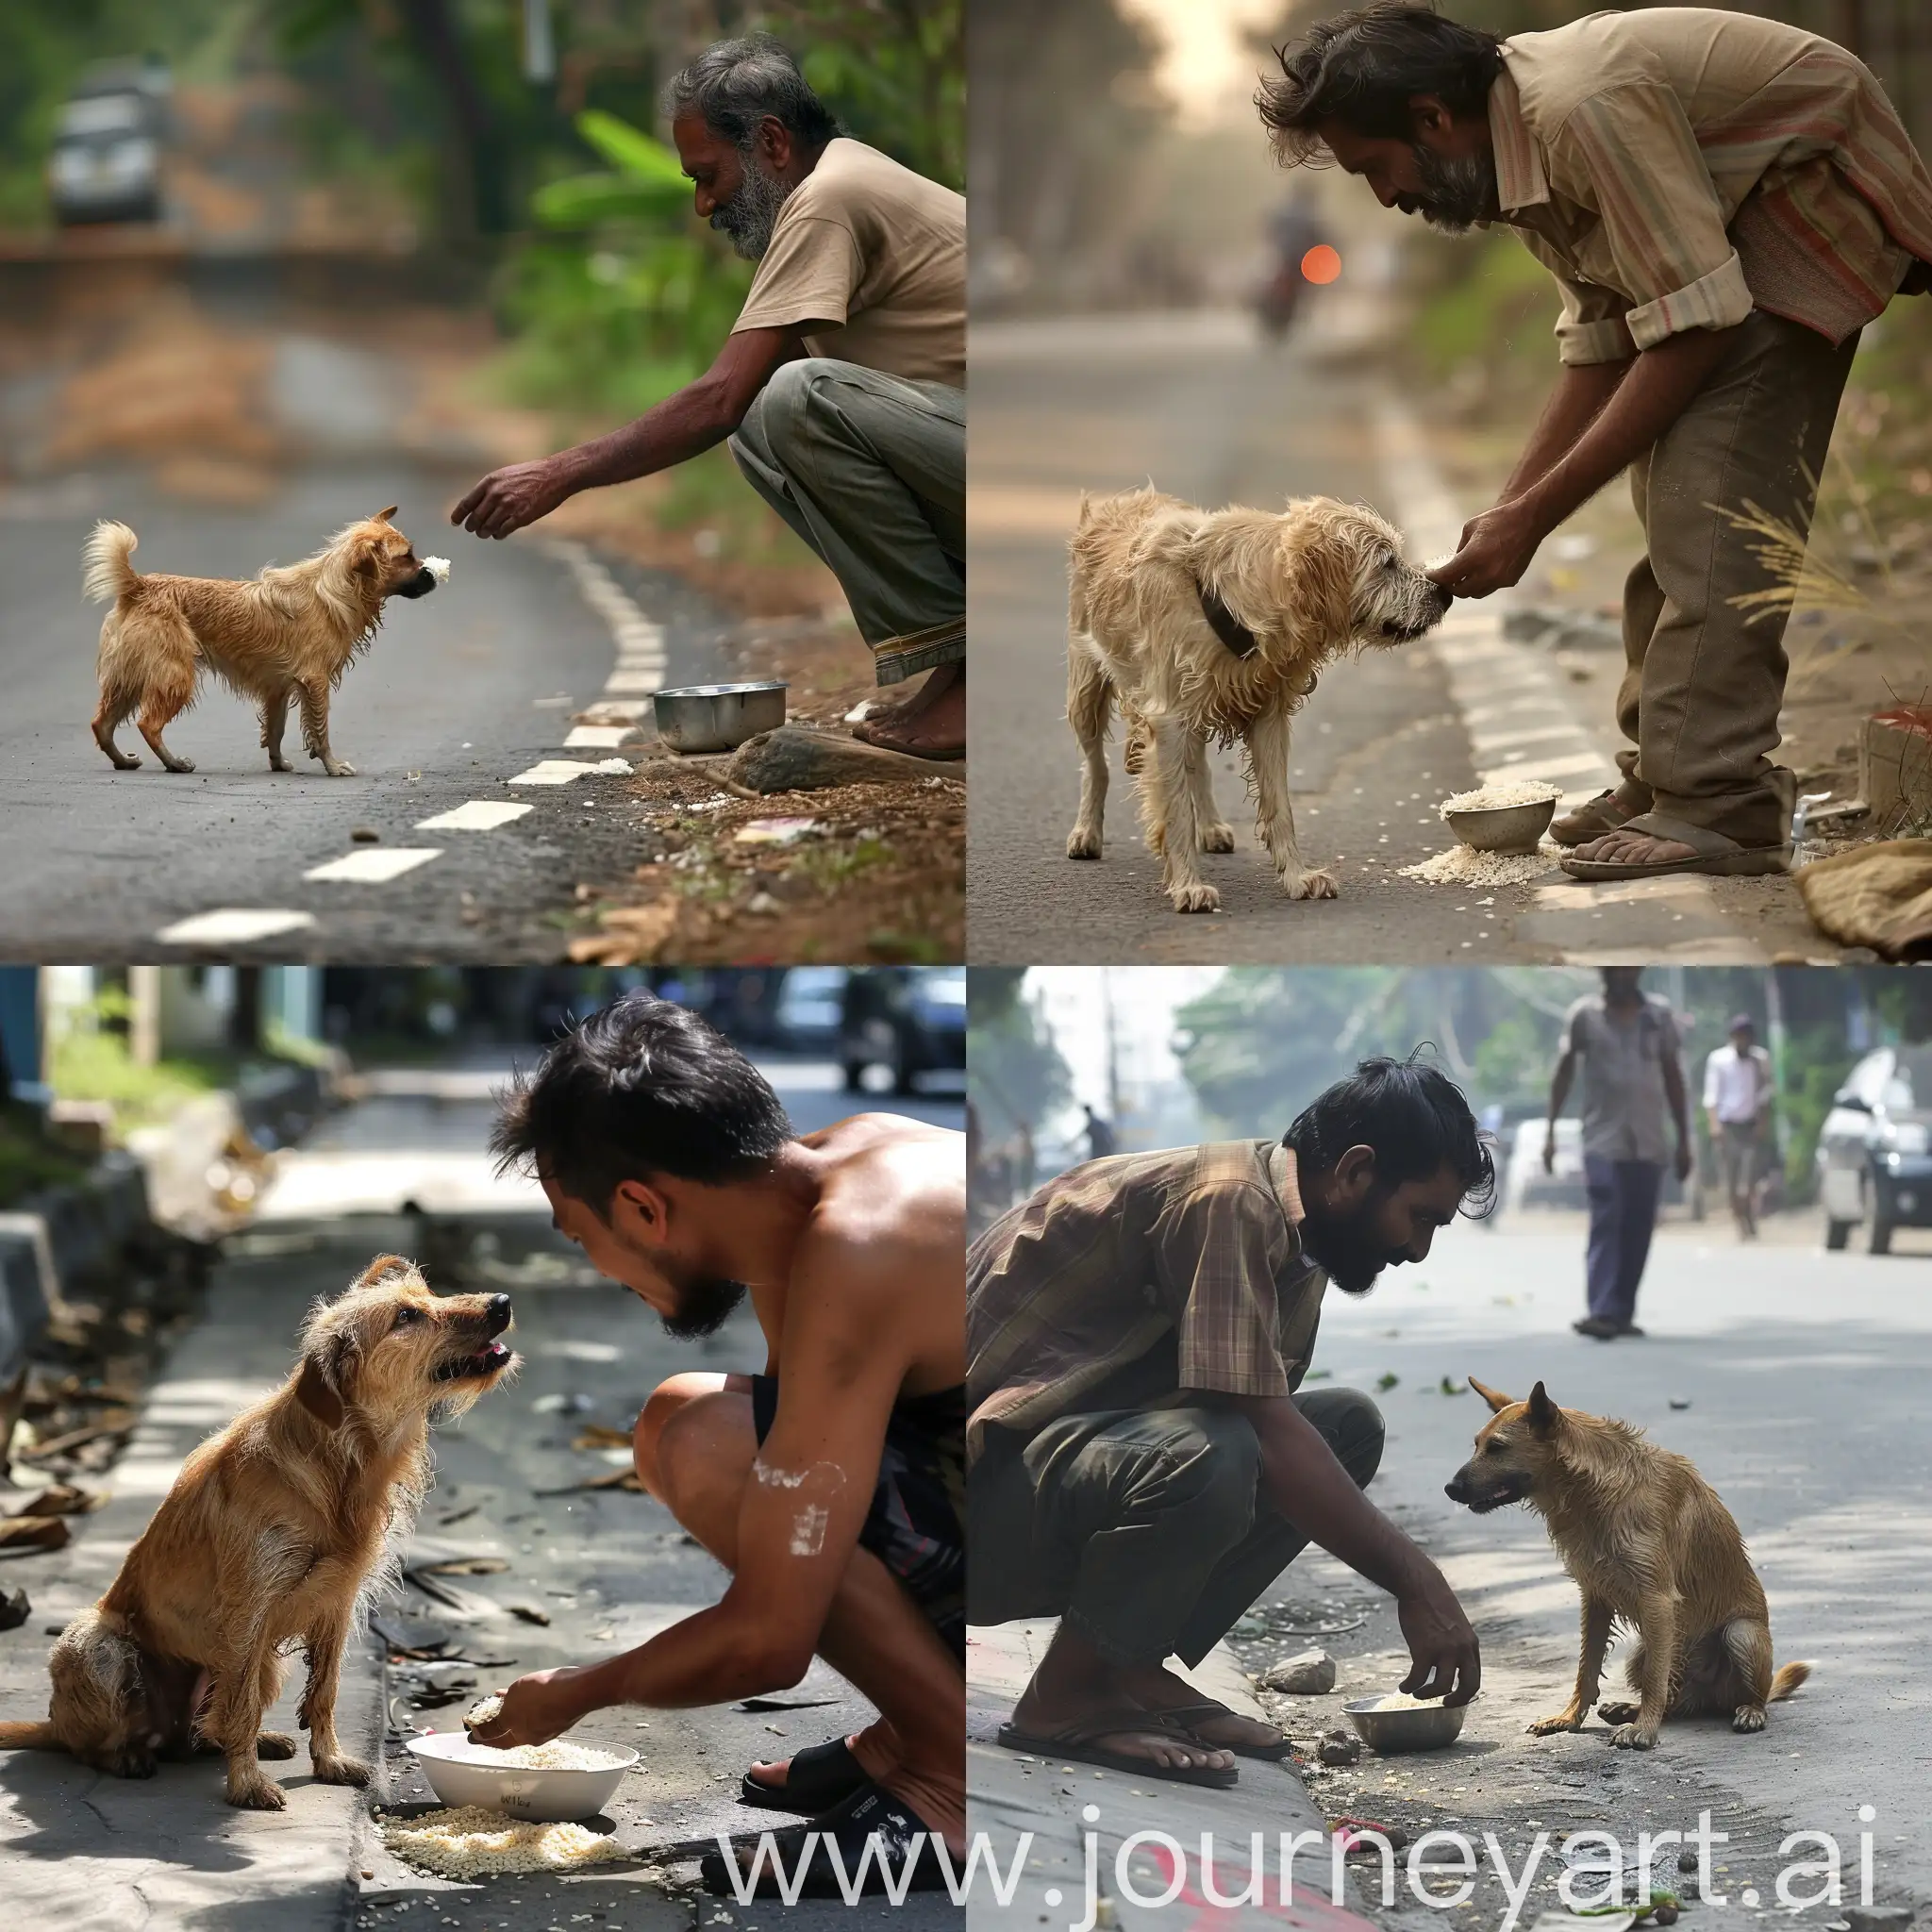 Compassionate-Act-Man-Giving-Rice-to-Stray-Dog-on-Roadside